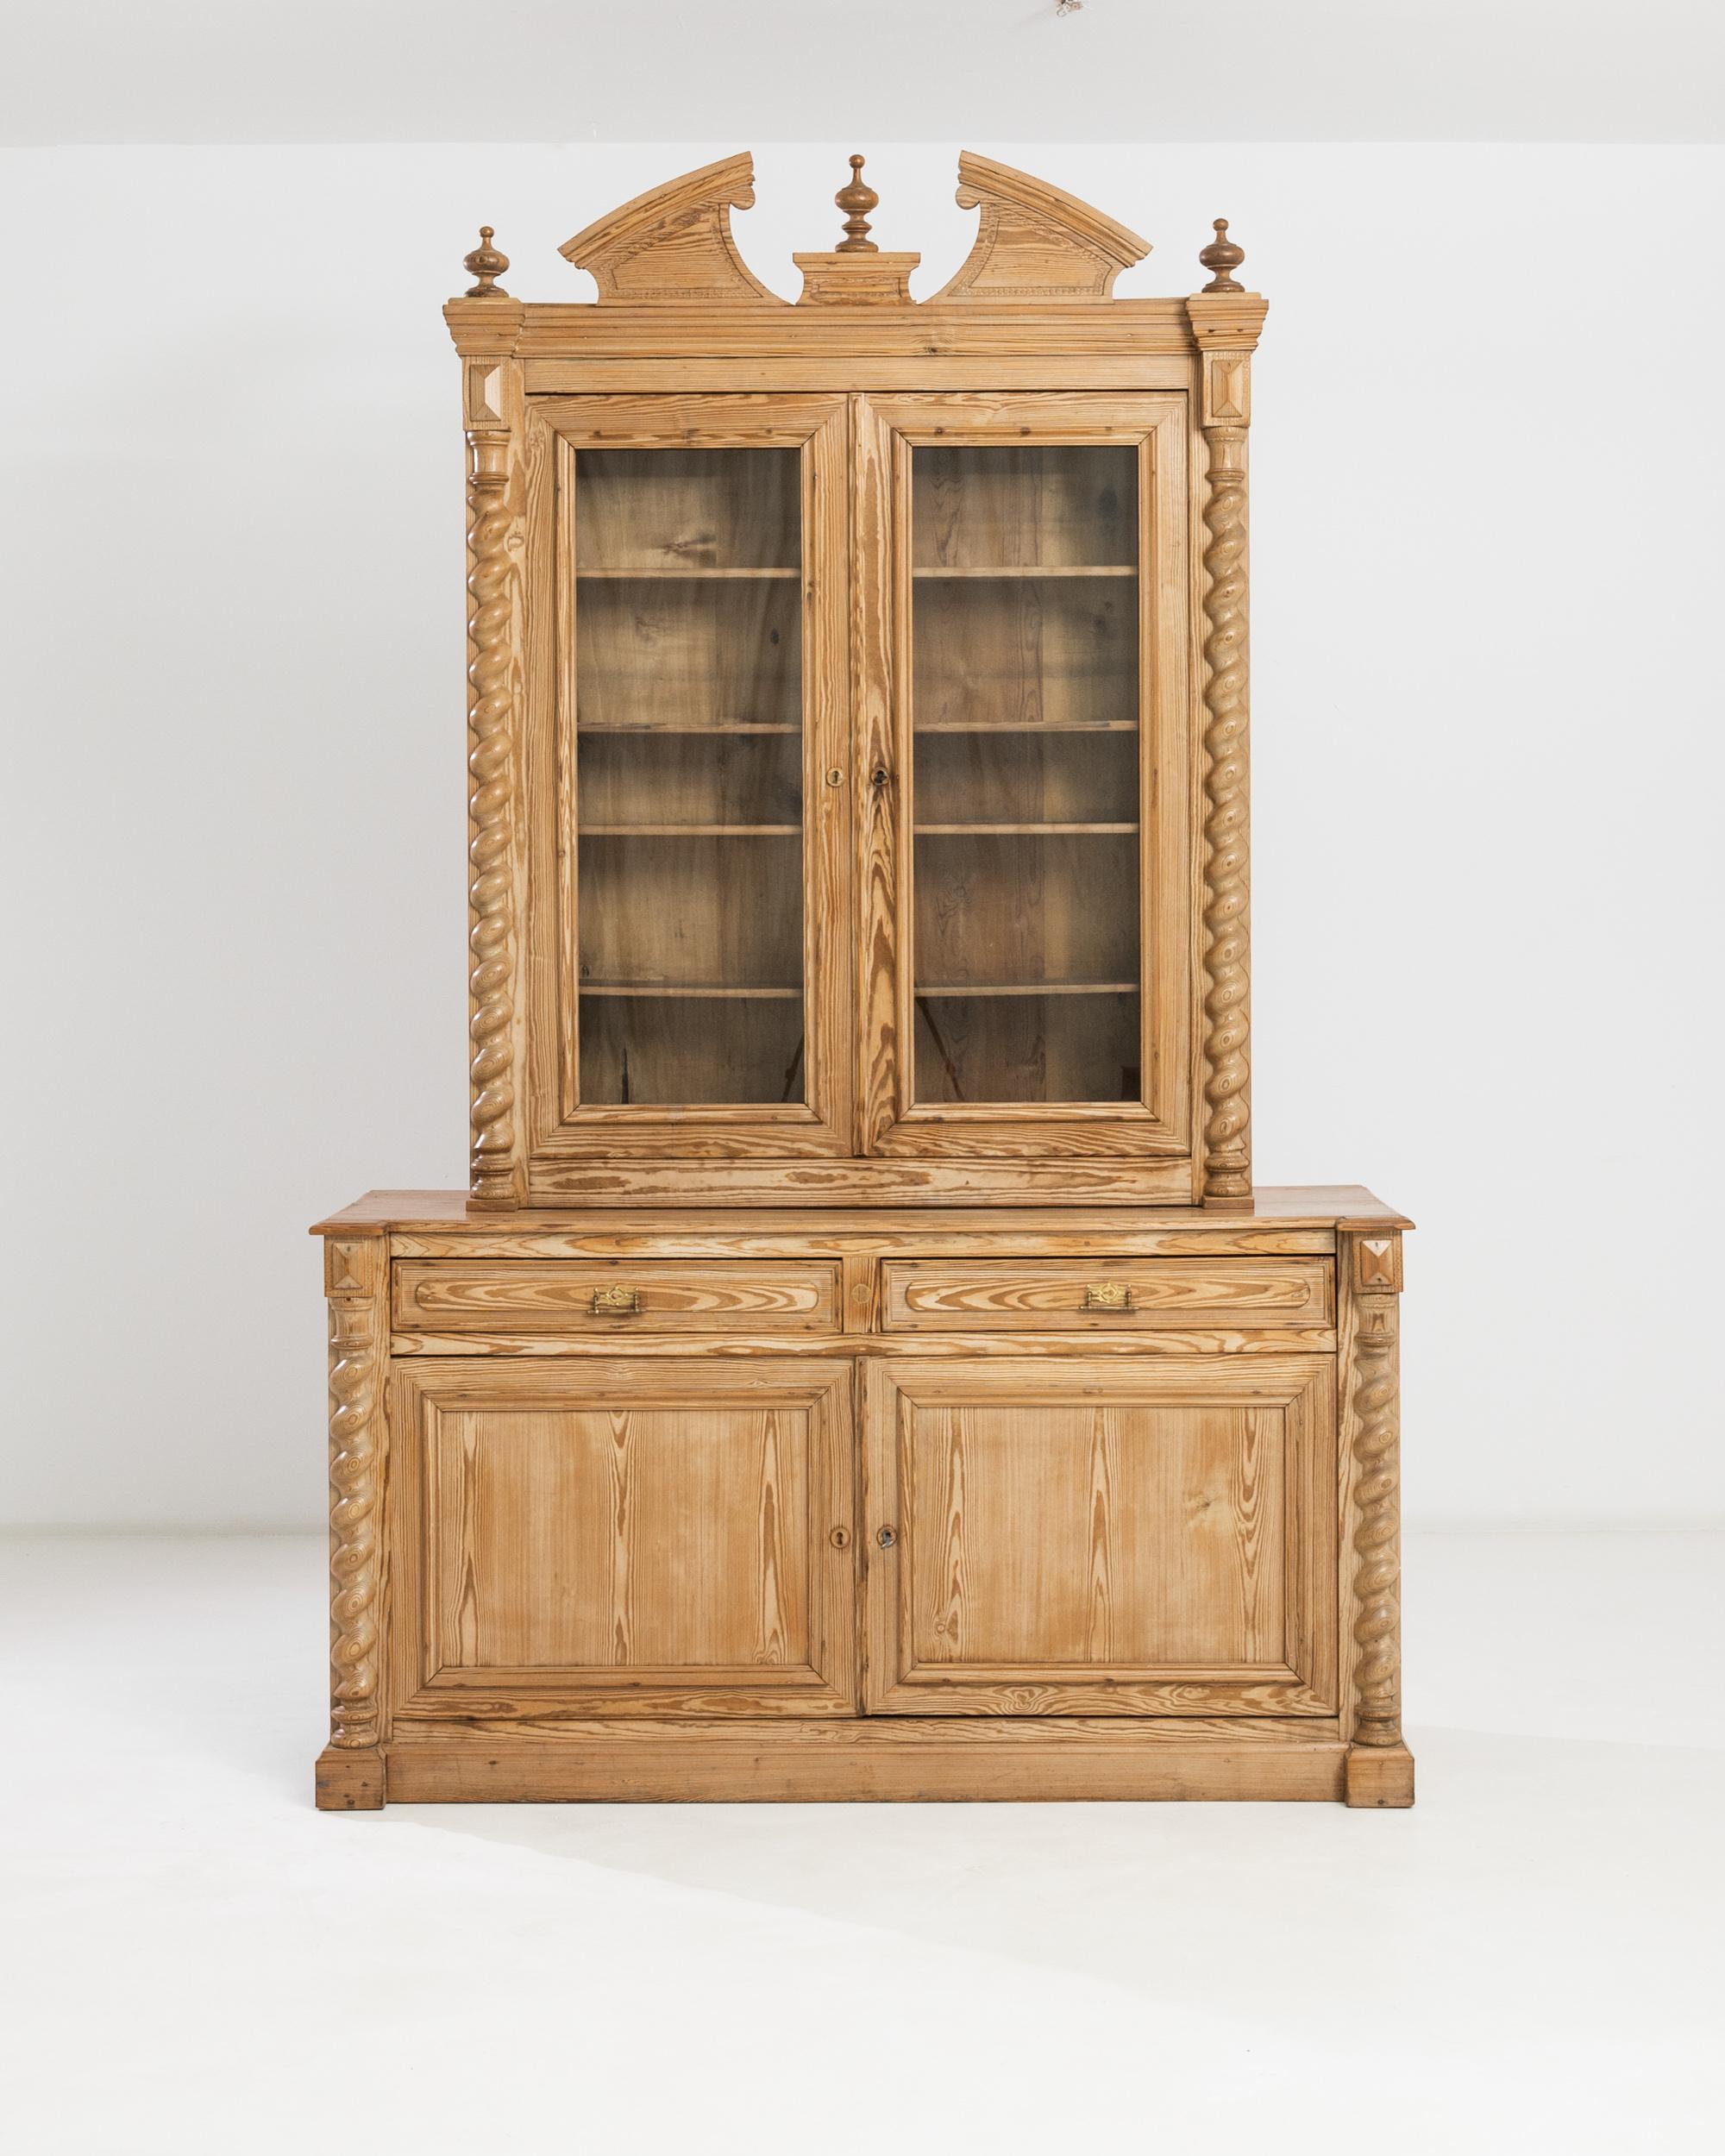 Built in France circa 1900, this fanciful country chest a deux corps boggles the imagination with its fine hand-carved ornamentation: spiral frames, delicate finials and the crown that forms a graceful half-arch on the top. The vitrine features an